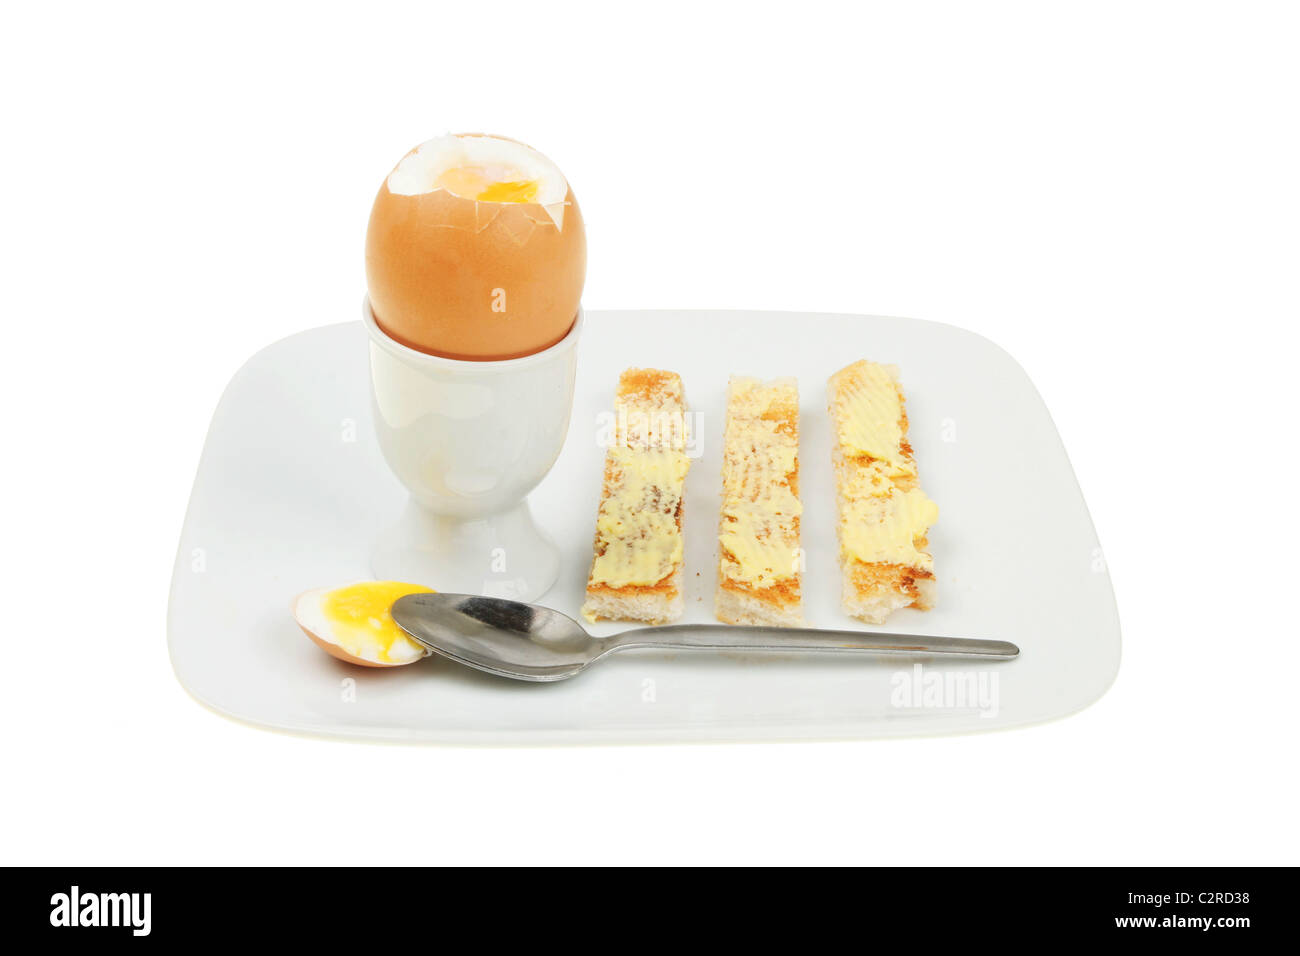 Soft boiled egg and buttered toast on a plate Stock Photo